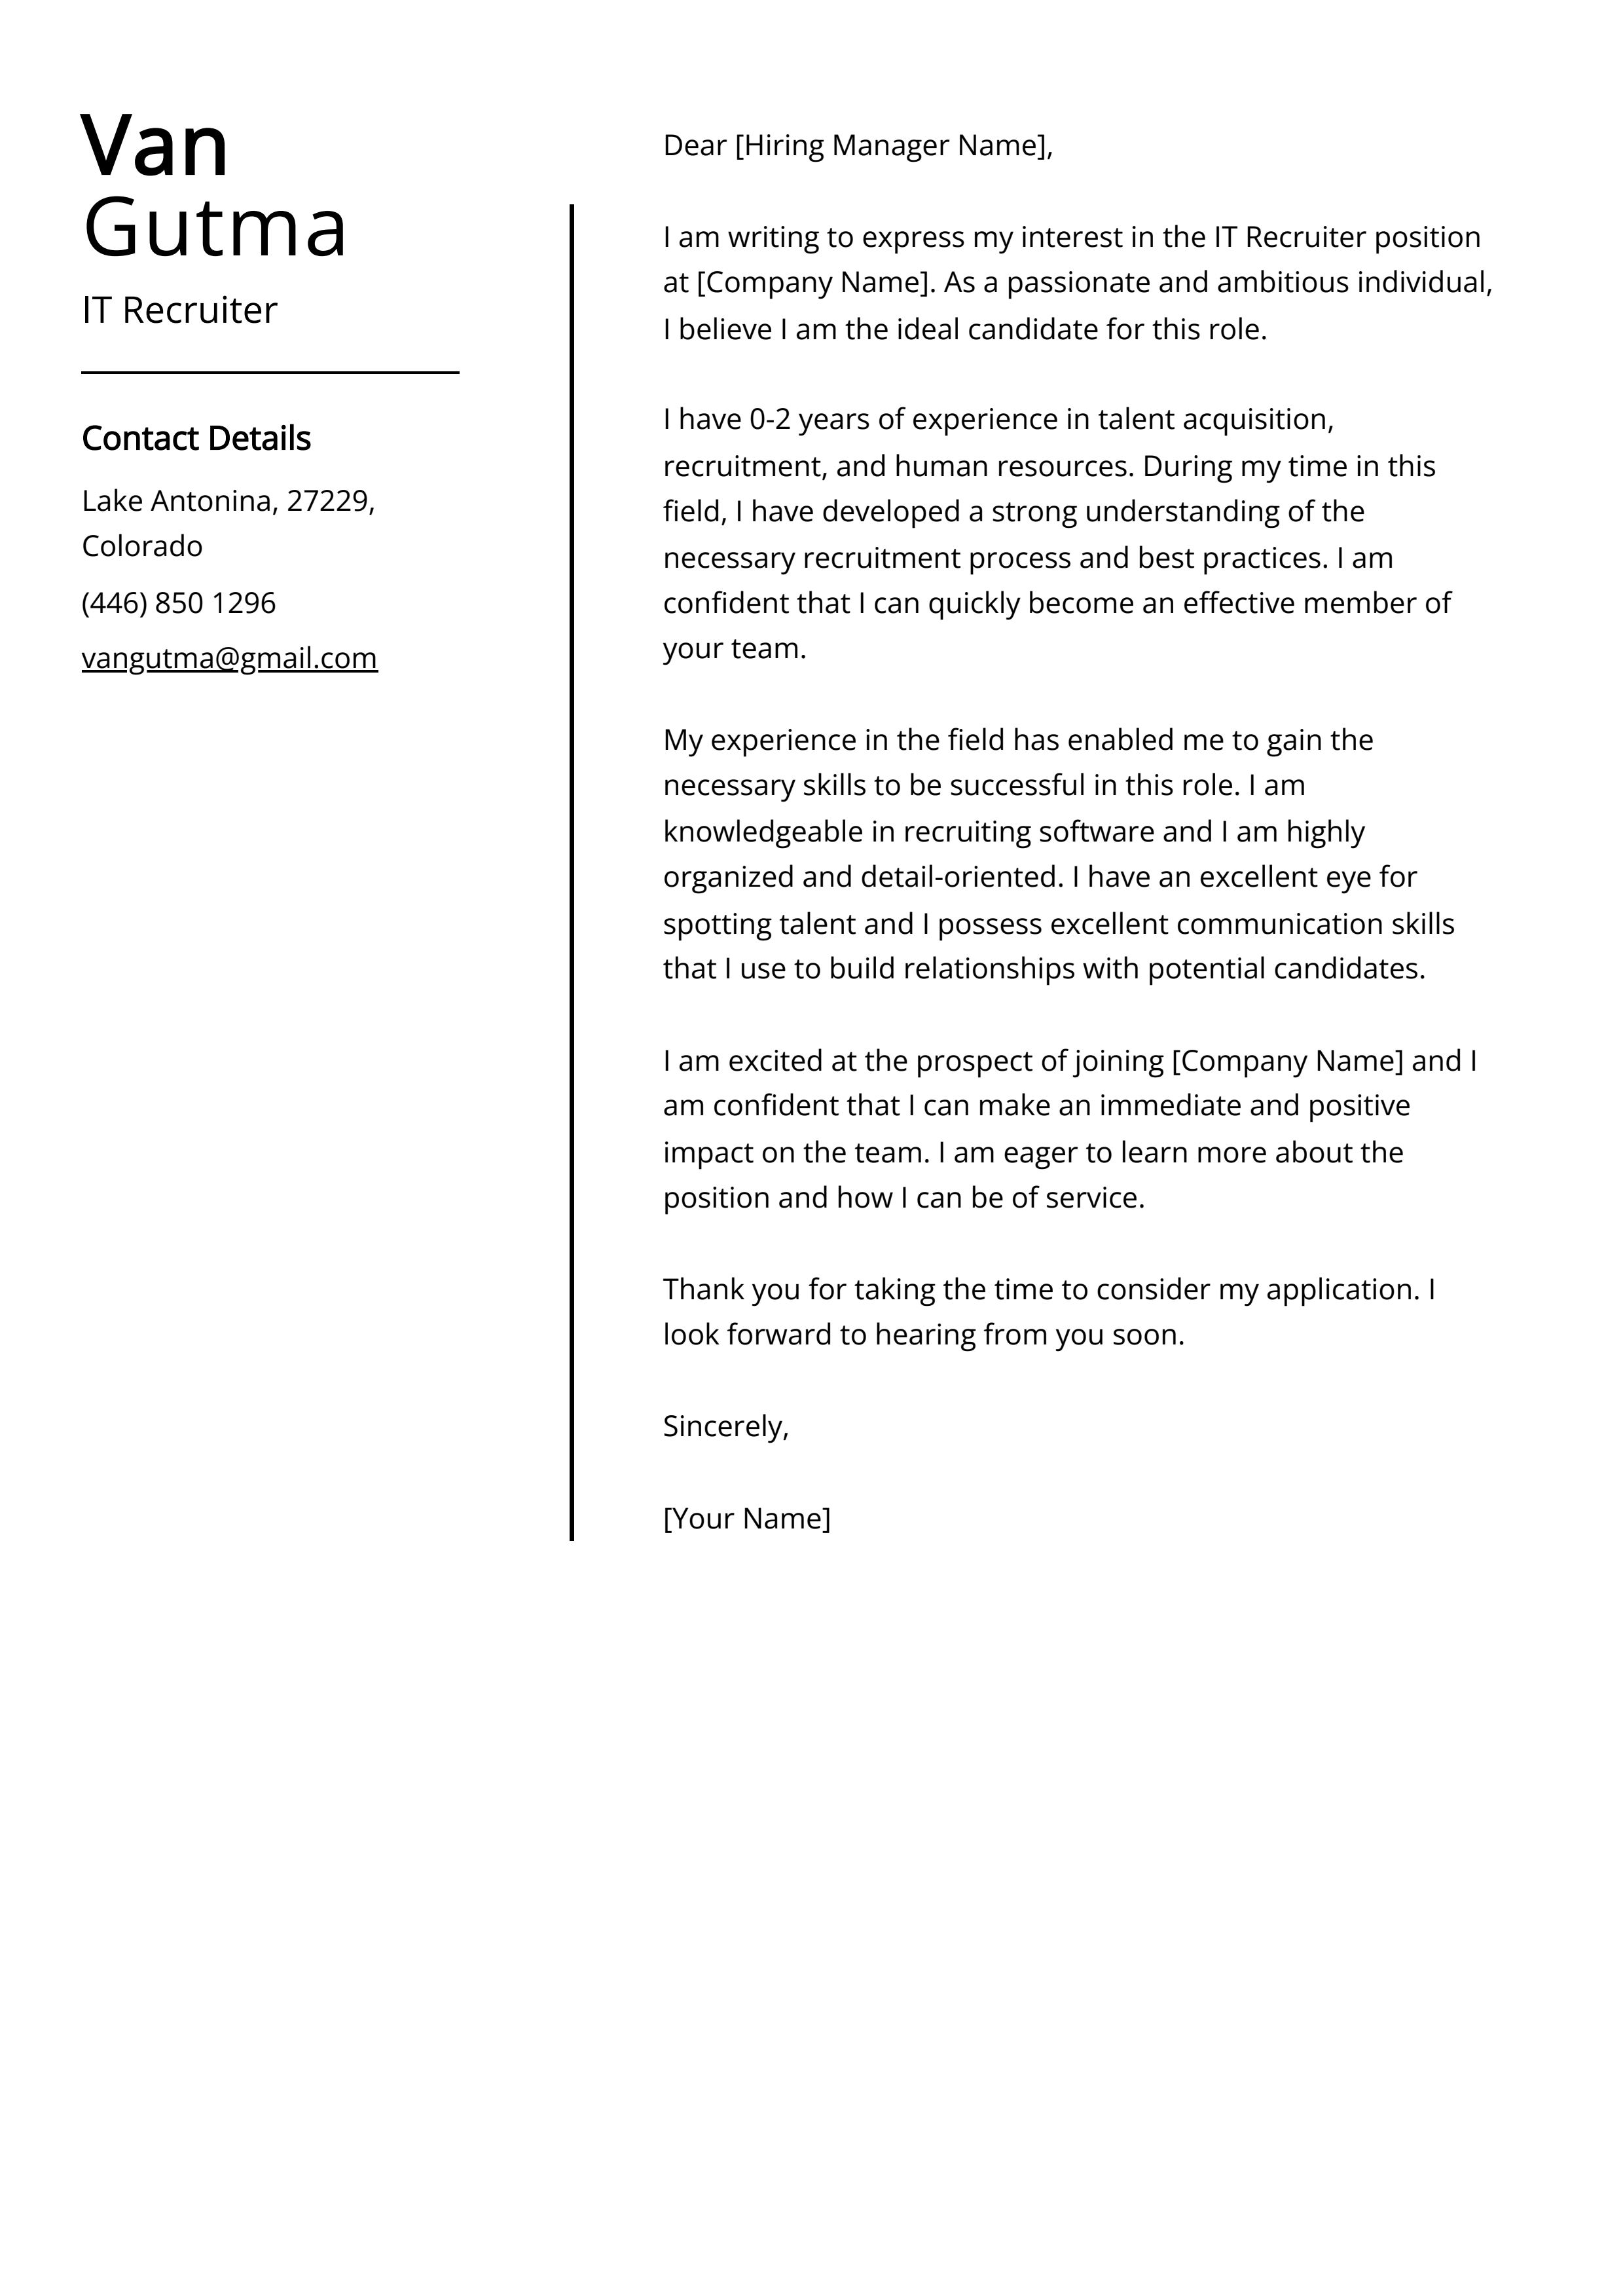 IT Recruiter Cover Letter Example